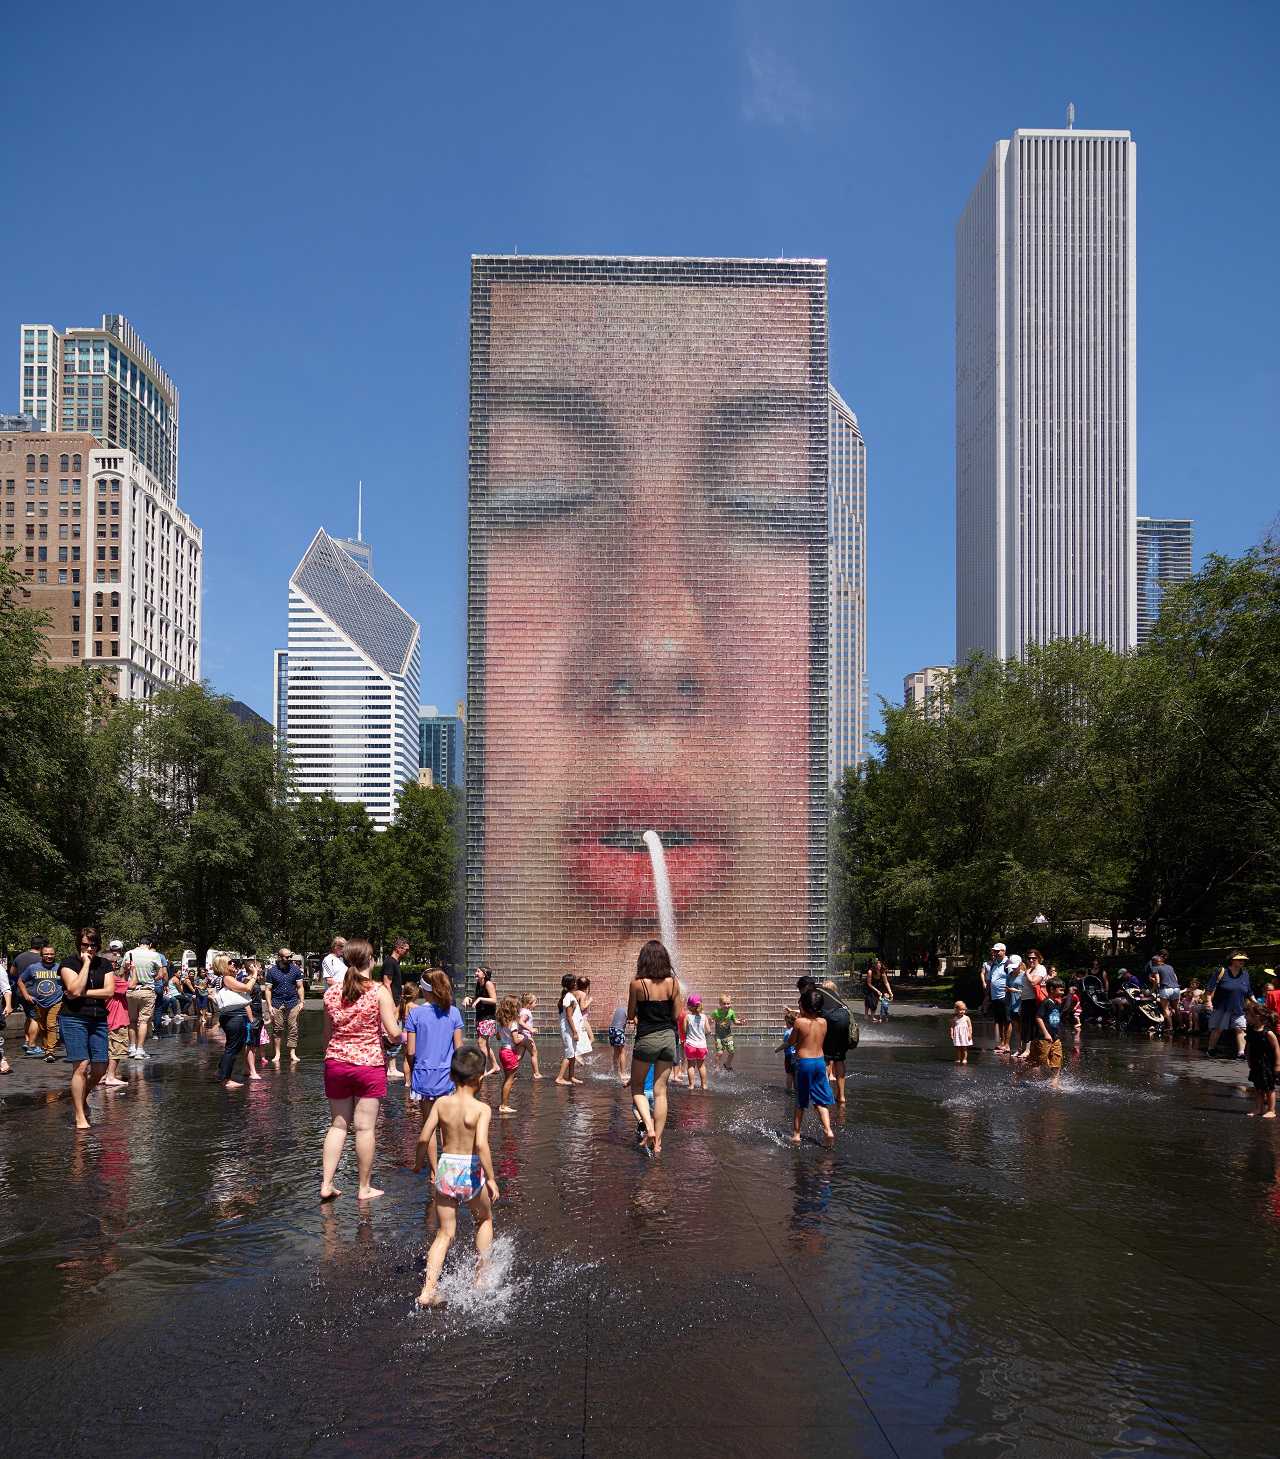 An image of people playing in the water in front of Crown Fountain, an interactive art installation in Chicago.